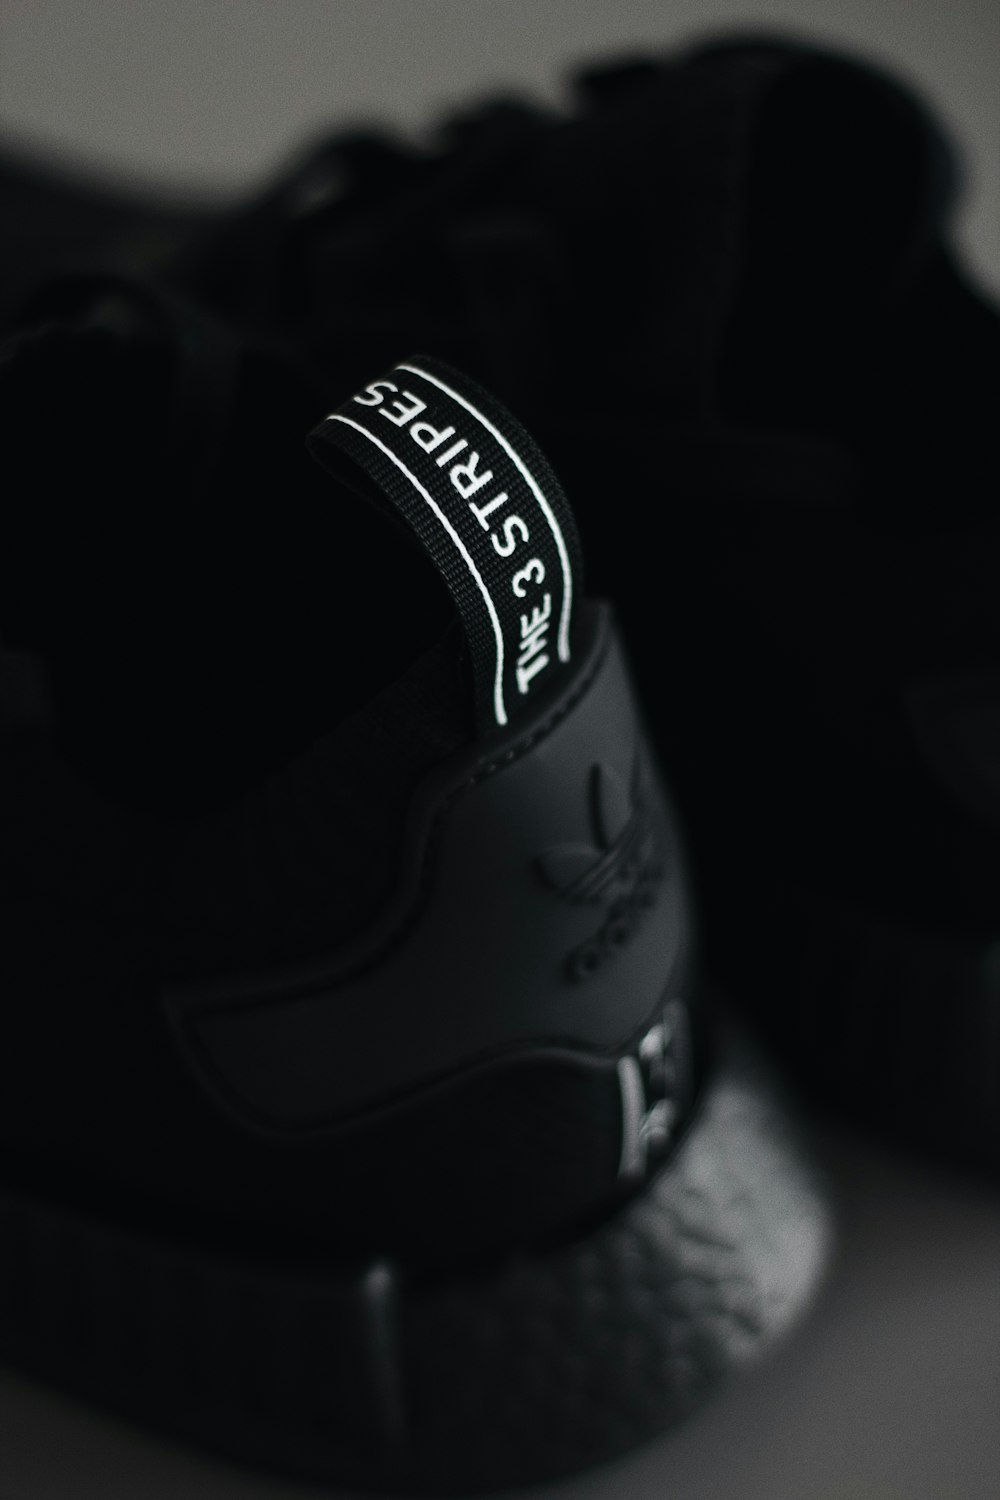 selective focus photography of Adidas NMD shoe